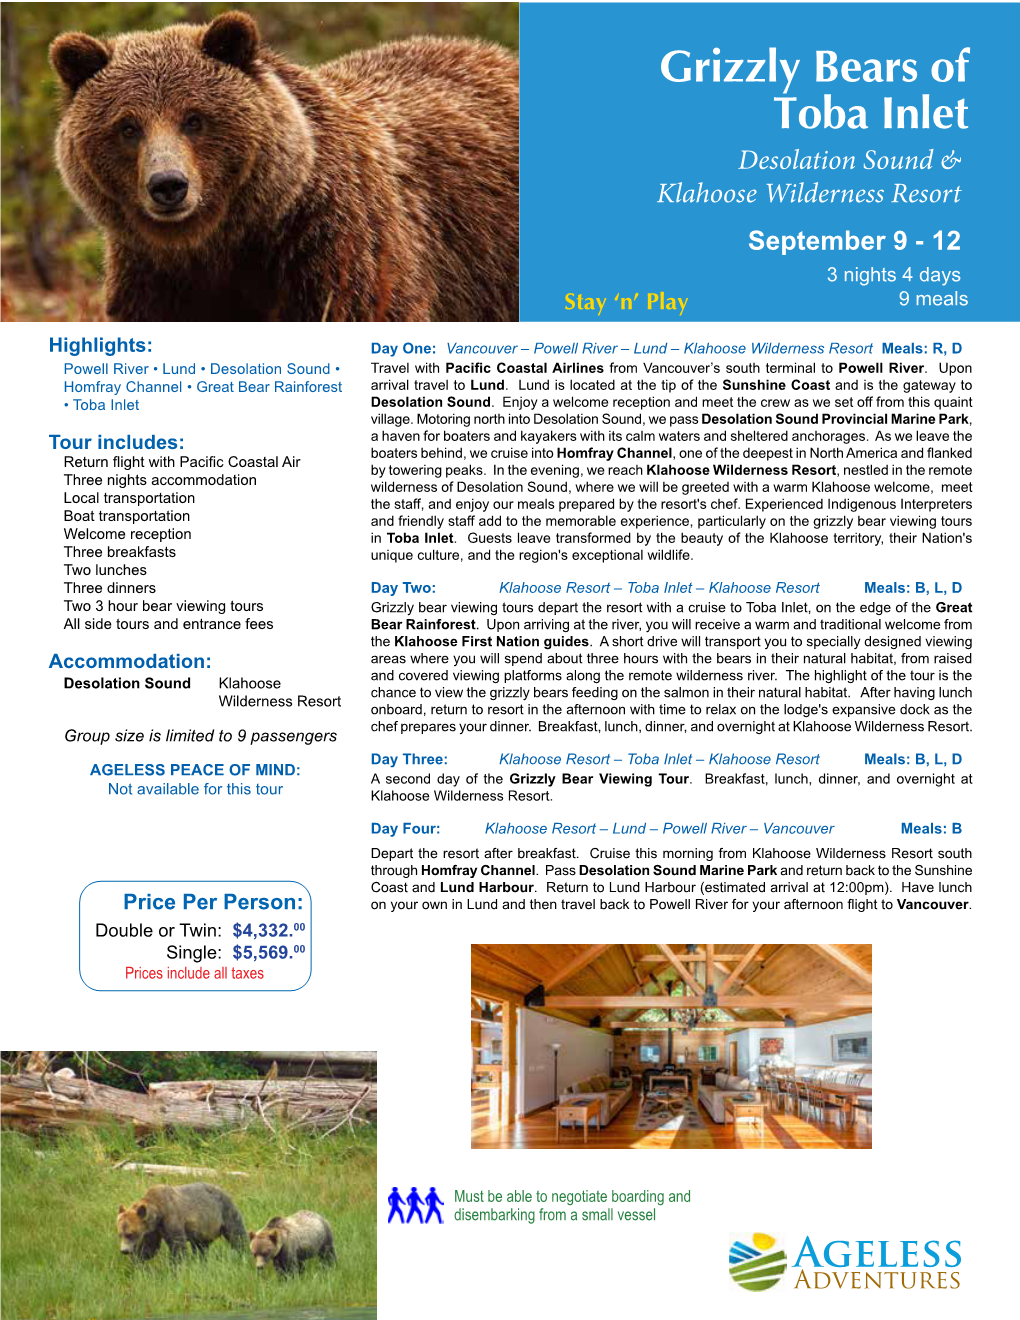 Grizzly Bears of Toba Inlet Desolation Sound & Klahoose Wilderness Resort September 9 - 12 3 Nights 4 Days Stay ‘N’ Play 9 Meals